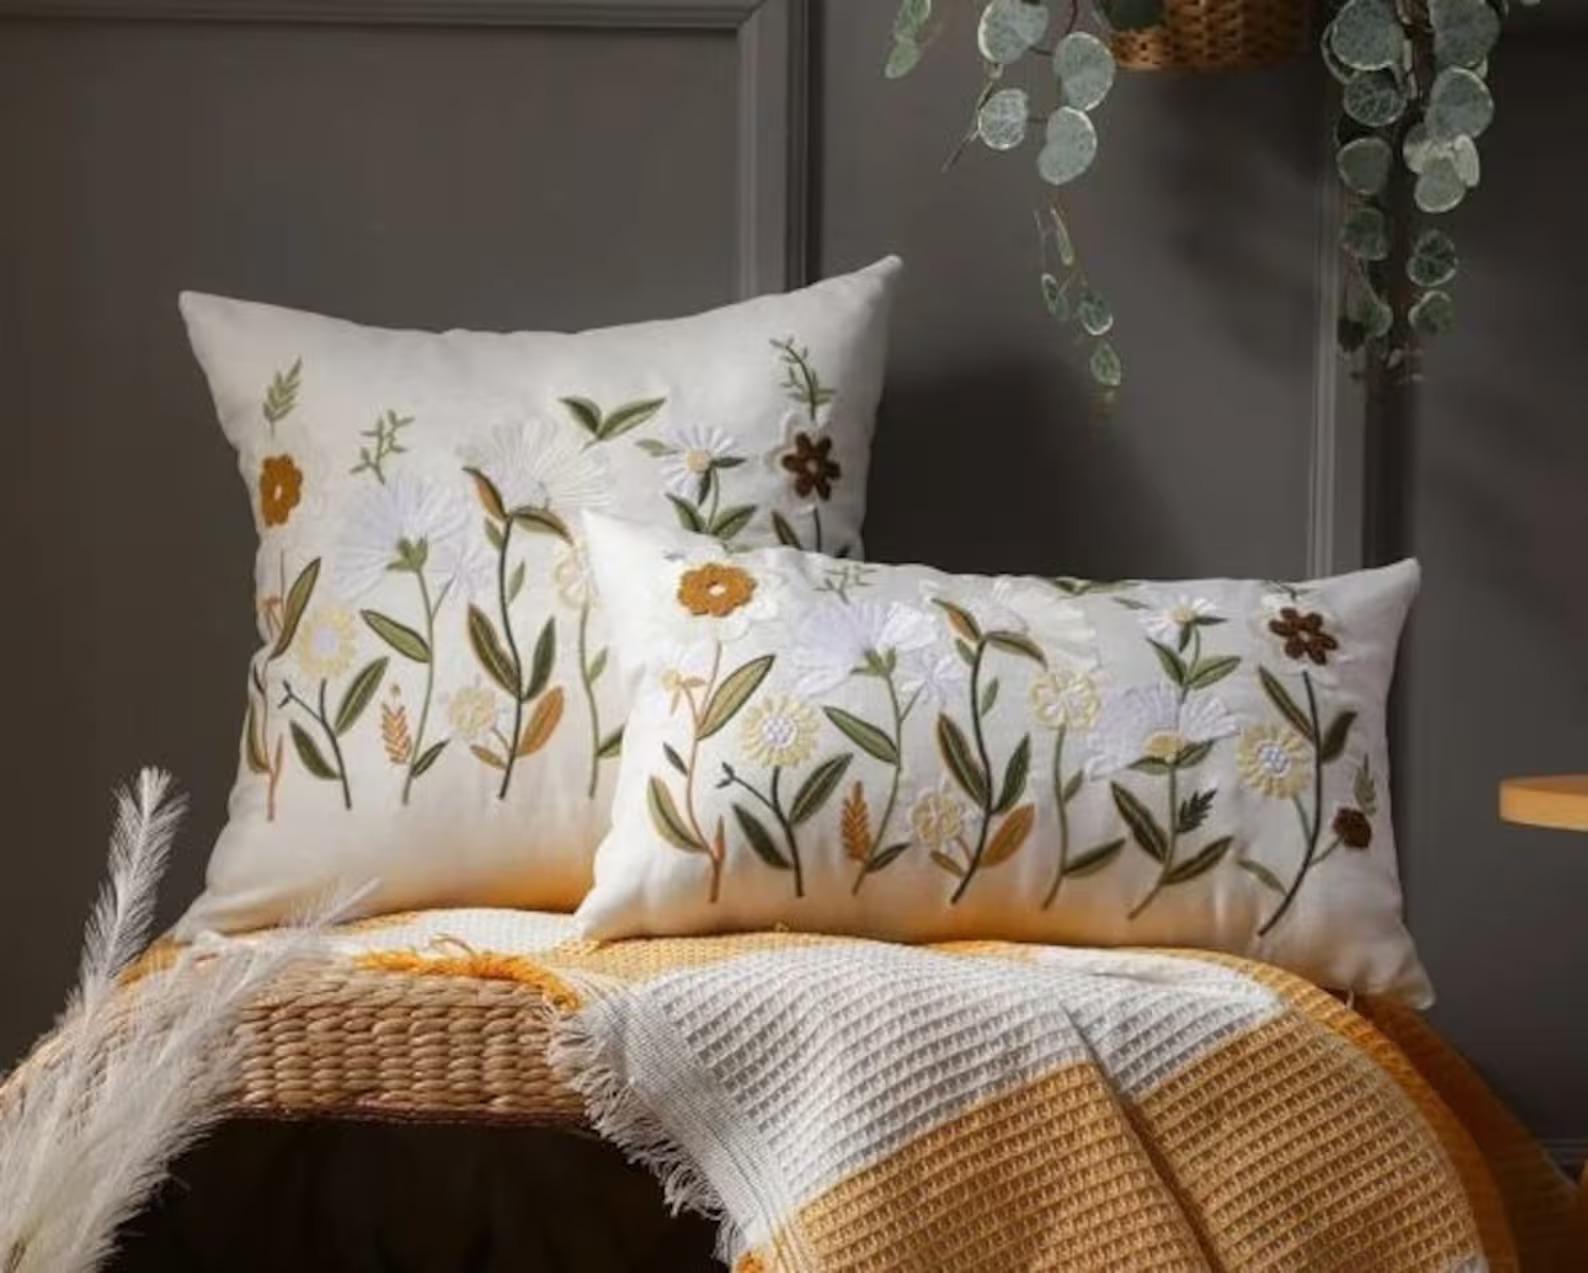 18 Gorgeous Floral Spring Pillow Designs for a Seasonal Update